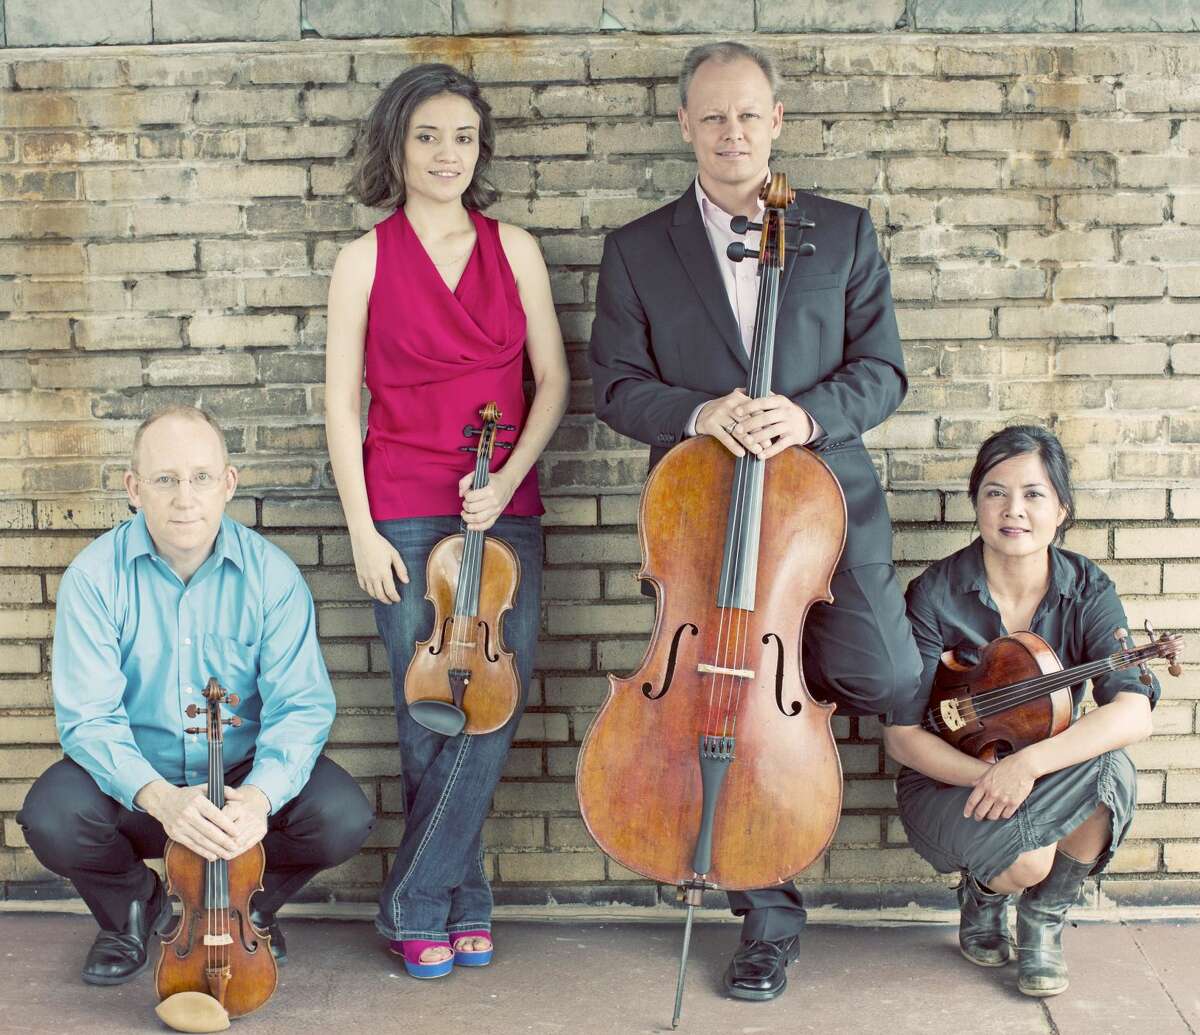 On June 30, the Arianna Quartet presents a mixed program of Wolf's Italian Serenade, Schubert's “Death and the Maiden," and Mendelssohn's Viola Quintet in B Flat Major with violist Richard Young at Music Mountain for a 3 p.m. performance. Music Mountain is at 225 Music Mountain Rd, Falls Village. Tickets are $39 and available online at www.musicmountain.org/tickets.